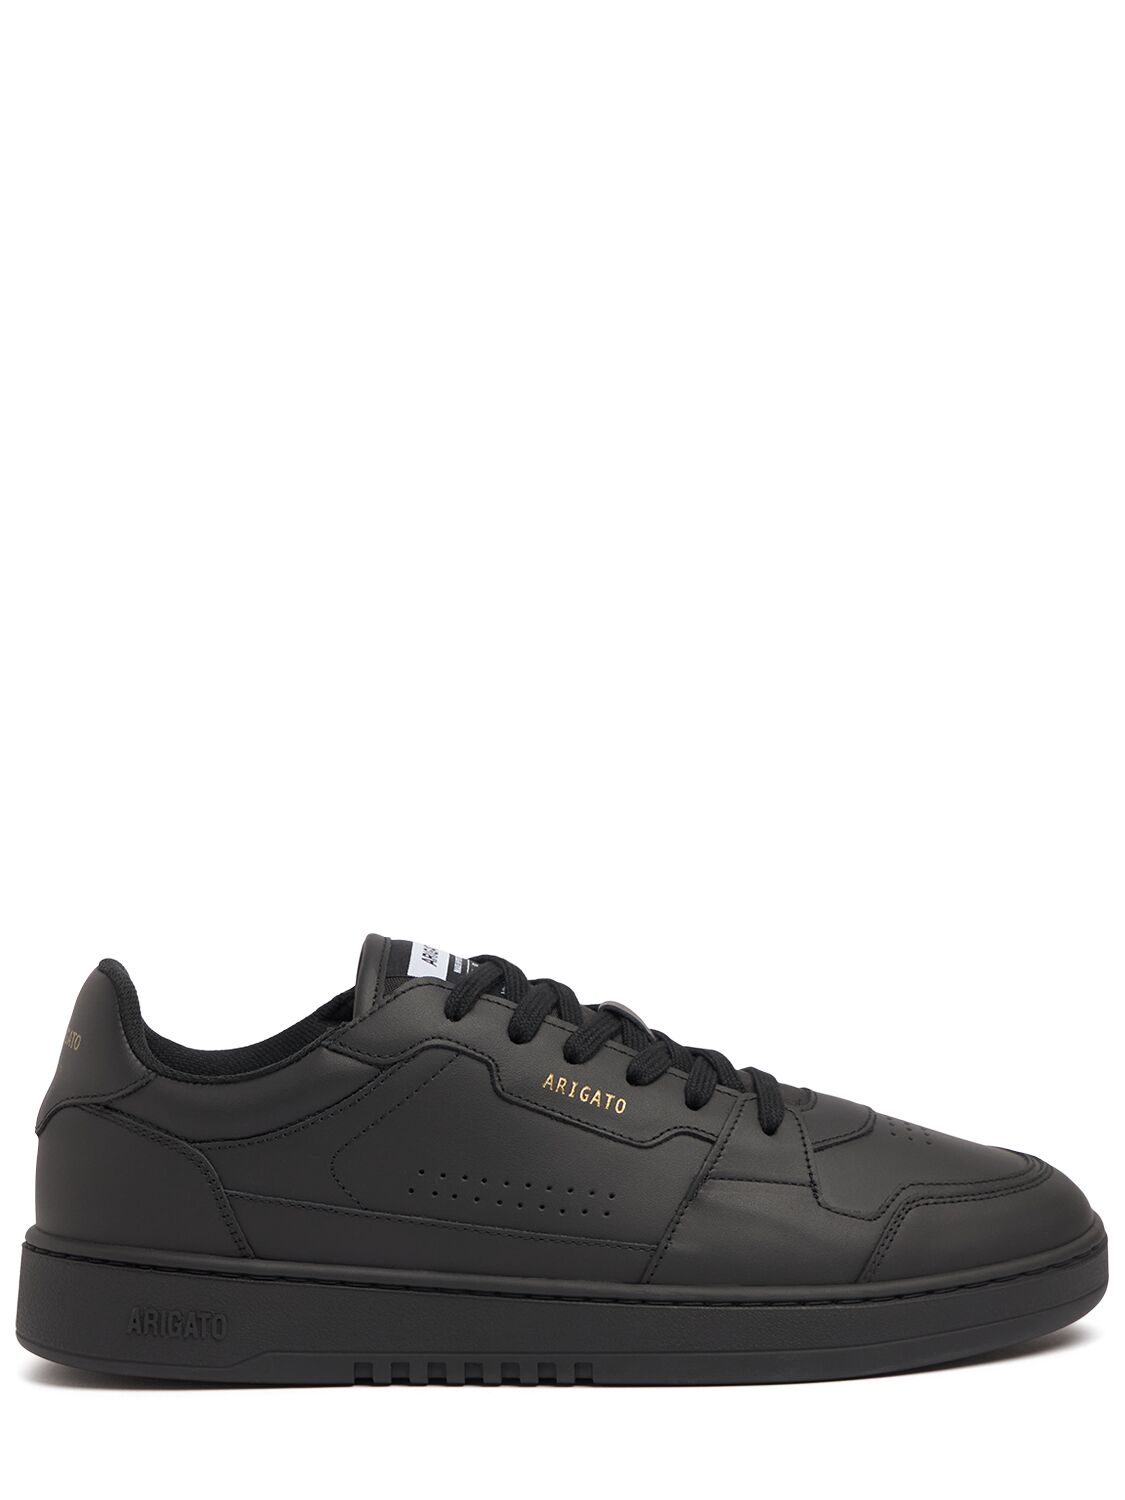 Axel Arigato Dice Low Leather Sneakers In Black